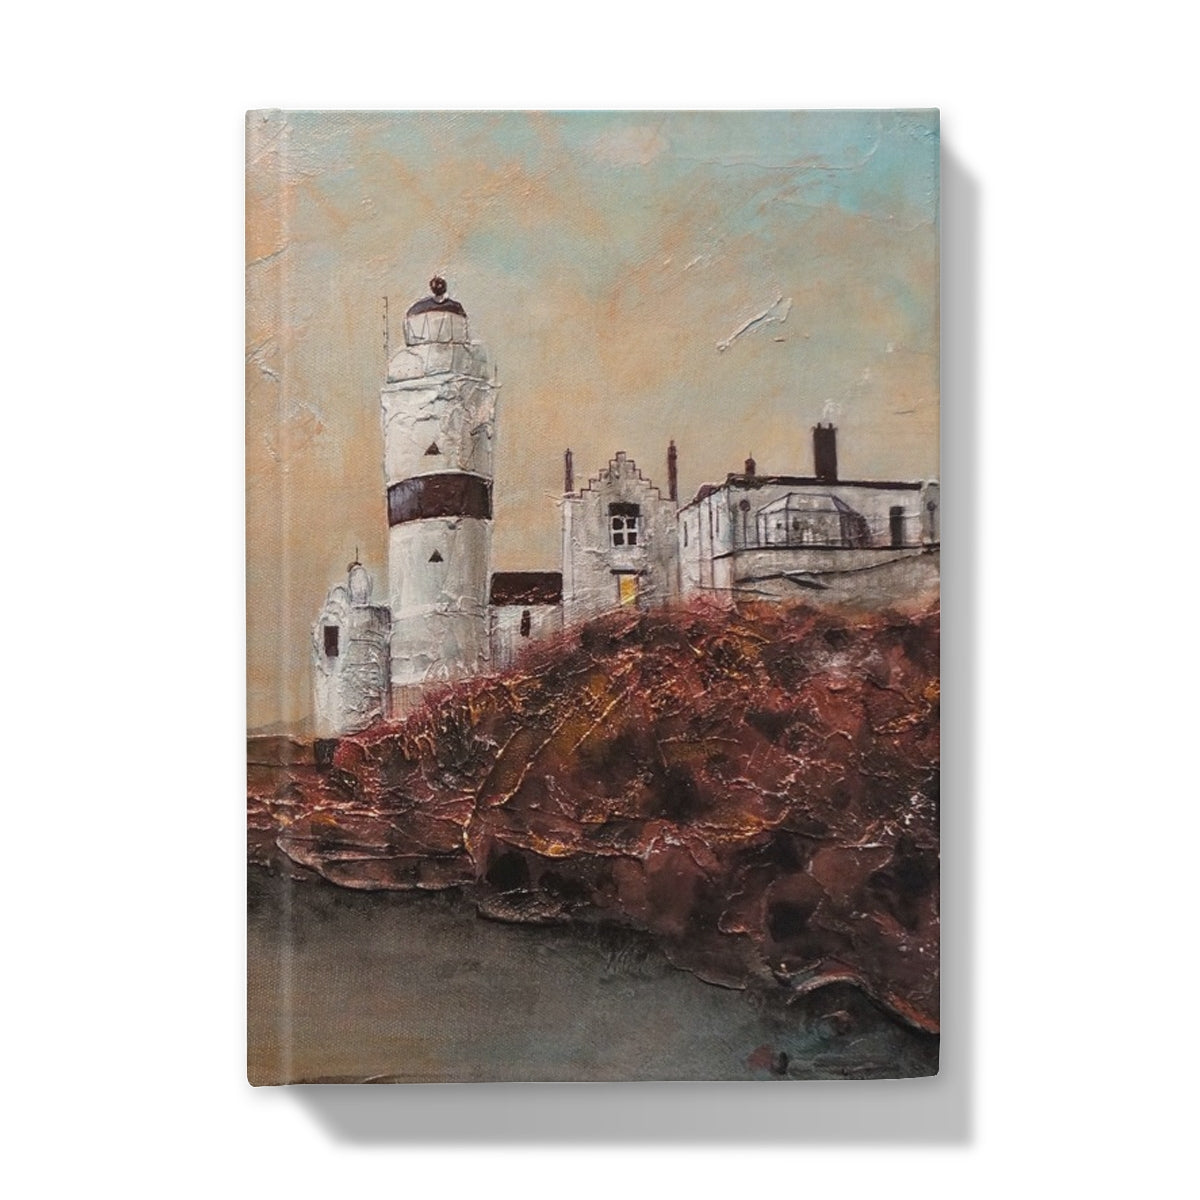 Cloch Lighthouse Dawn Art Gifts Hardback Journal-Journals & Notebooks-River Clyde Art Gallery-5"x7"-Lined-Paintings, Prints, Homeware, Art Gifts From Scotland By Scottish Artist Kevin Hunter